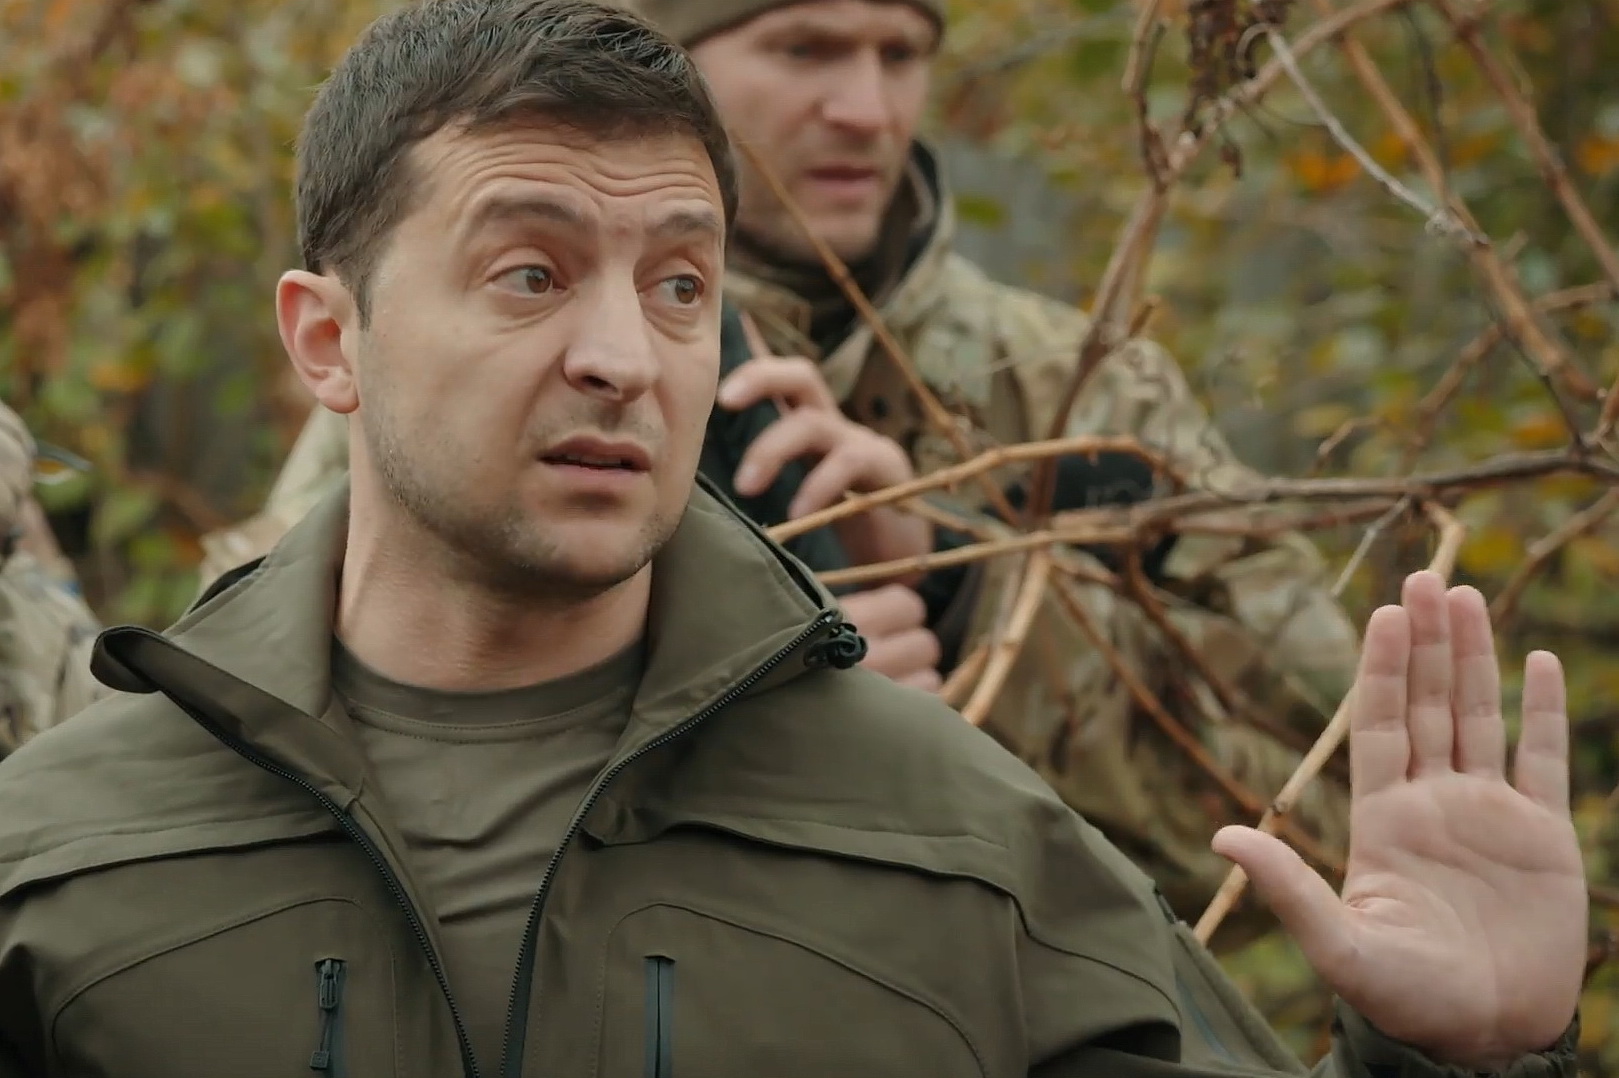 I'm not a loser': Zelensky clashes with veterans over Donbas disengagement (VIDEO) - Oct. 28, 2019 | KyivPost